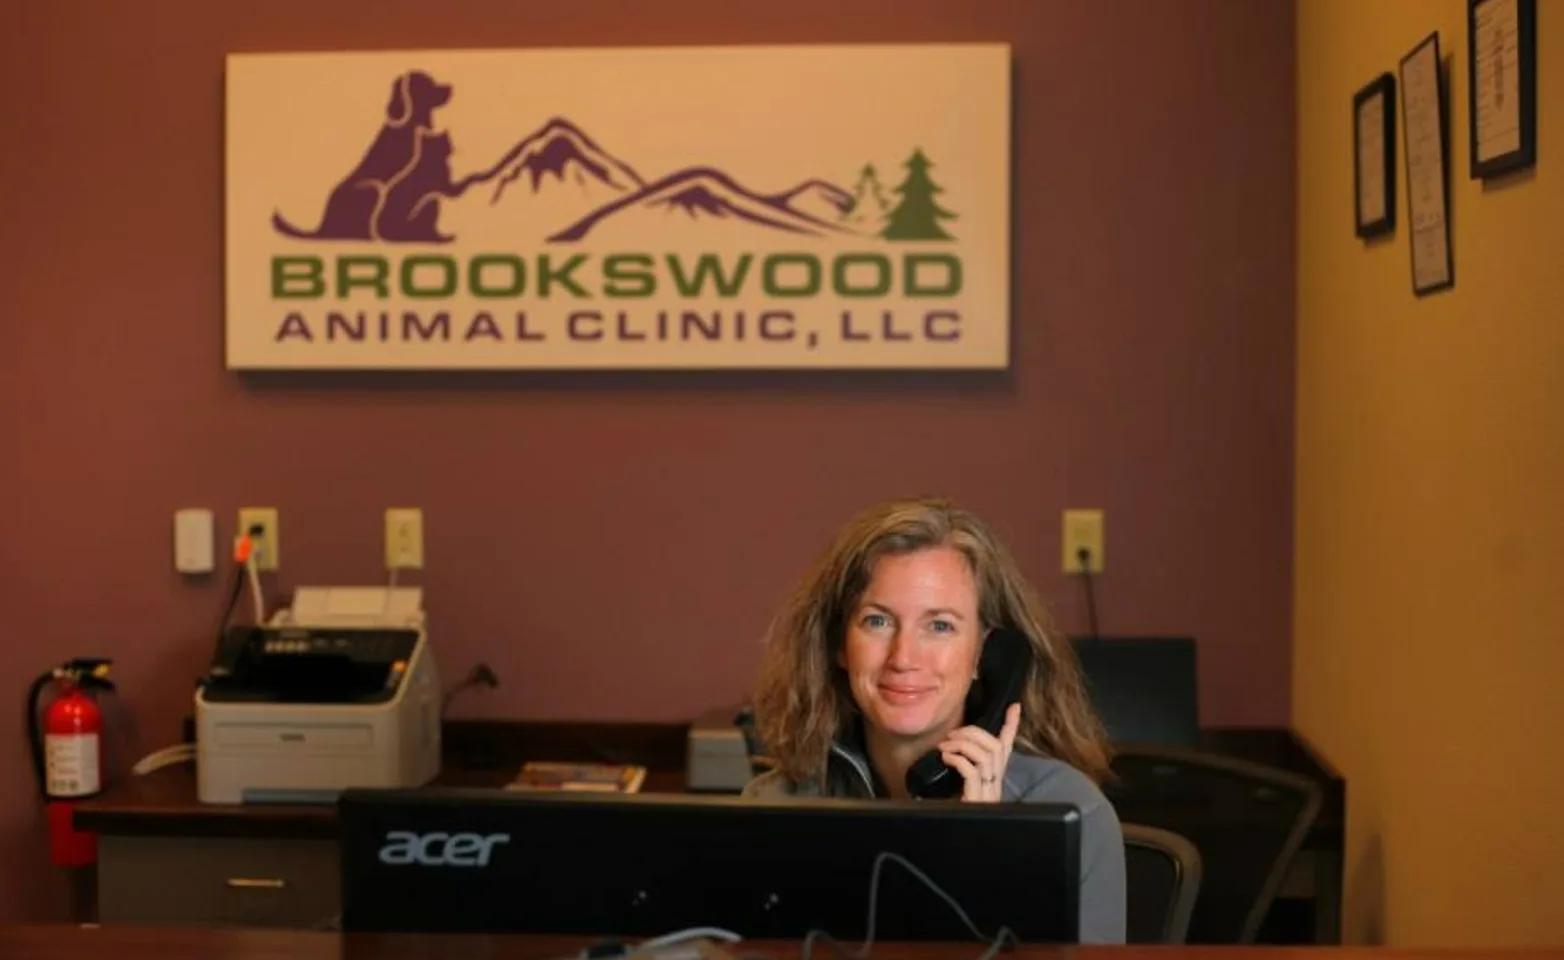 A receptionist at the front desk of Brookswood Animal Clinic